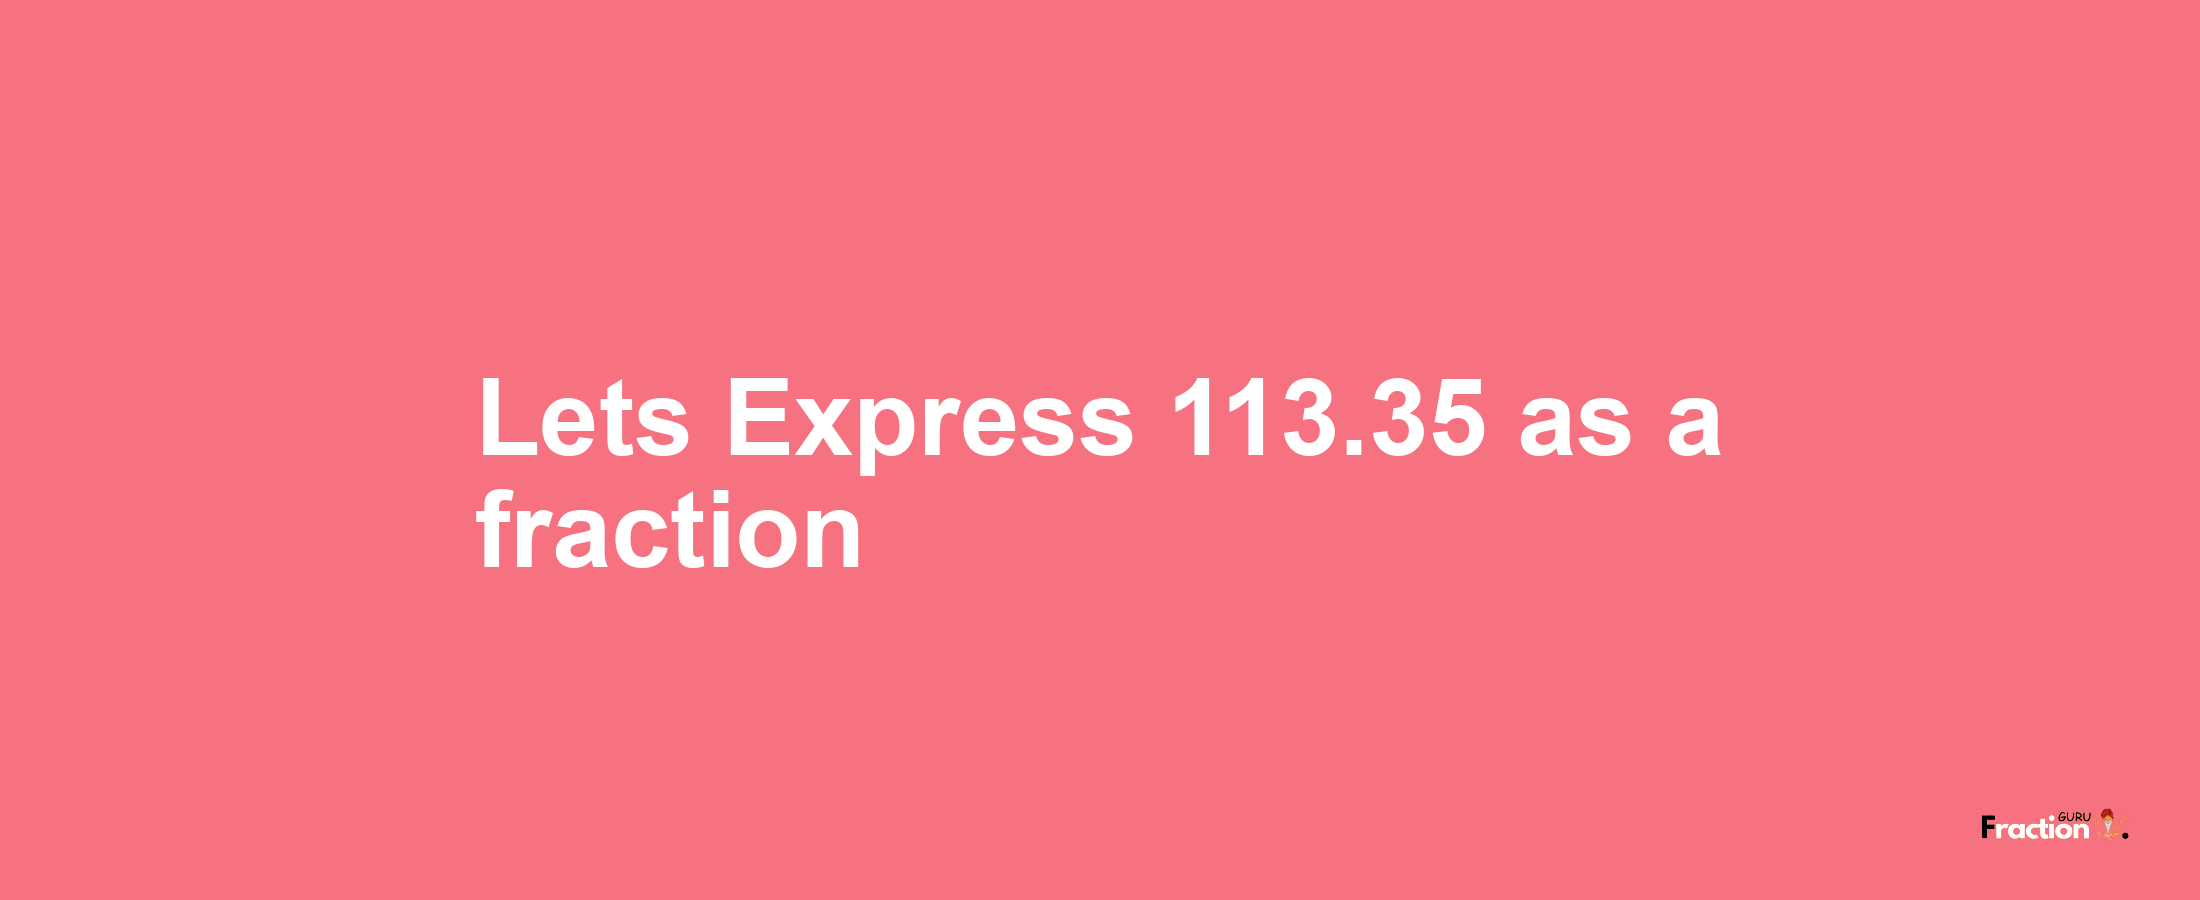 Lets Express 113.35 as afraction